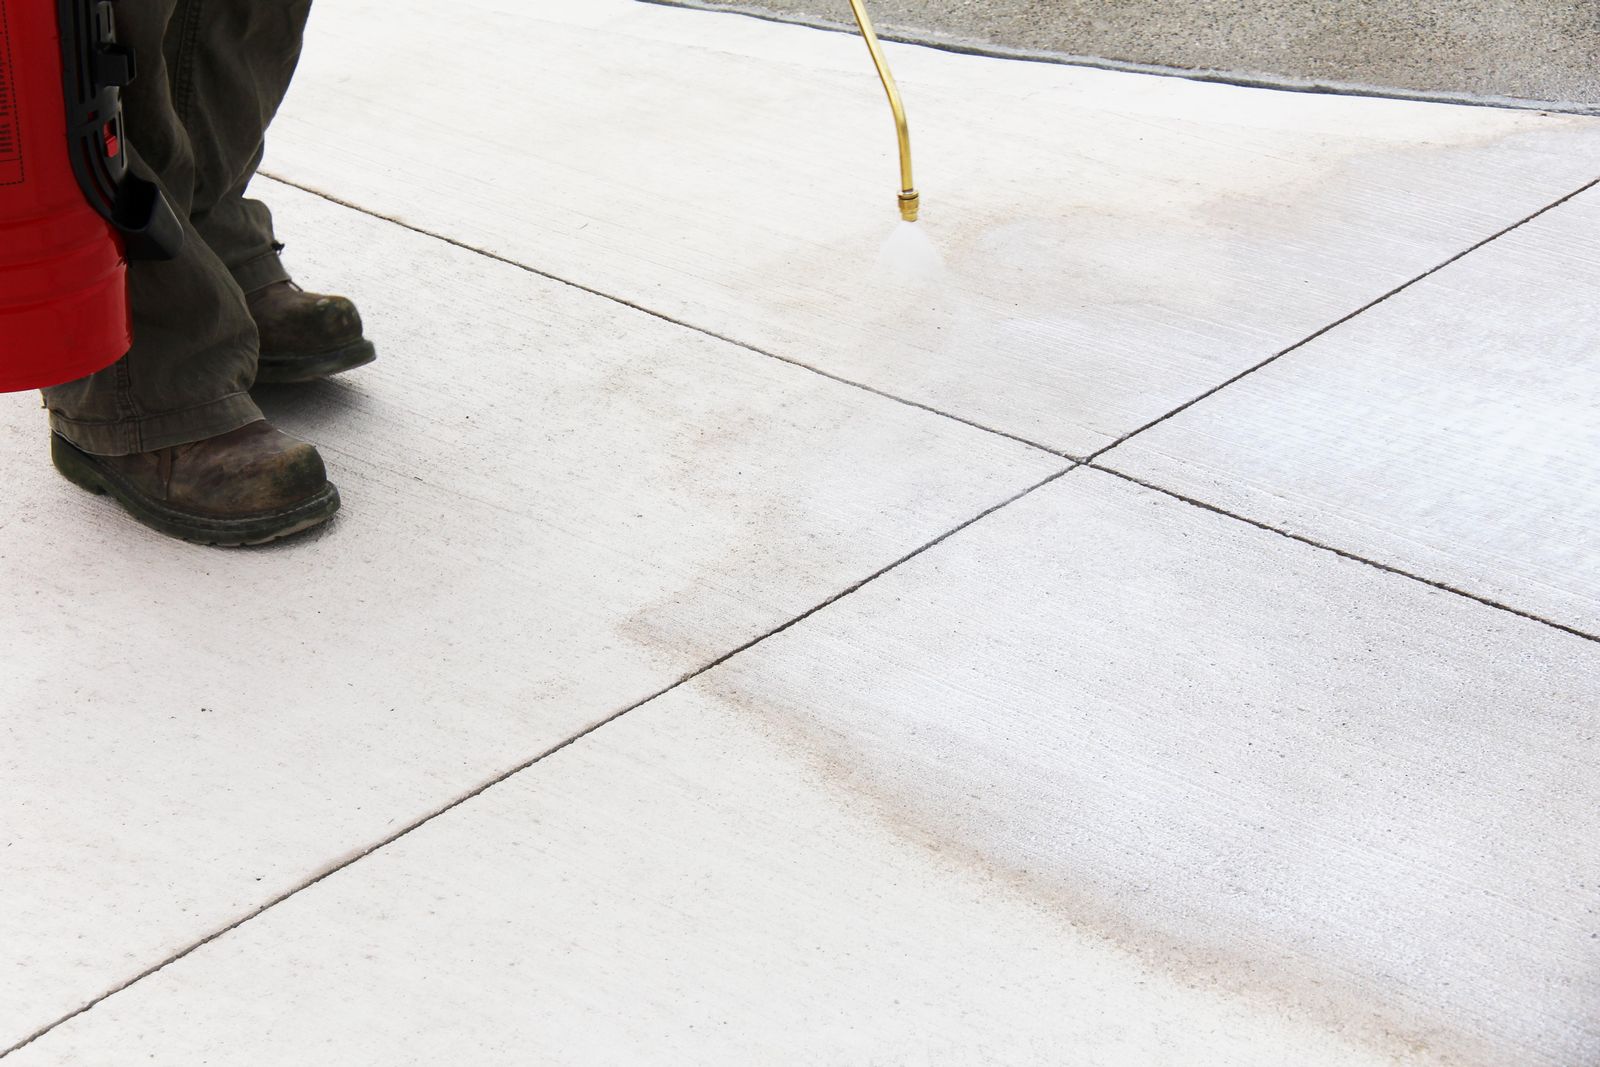 W. R. Meadows announced Intraguard, a water-based, penetrating concrete sealing compound for exterior concrete surfaces specifically designed to limit the intrusion of moisture and chlorides into concrete surfaces.